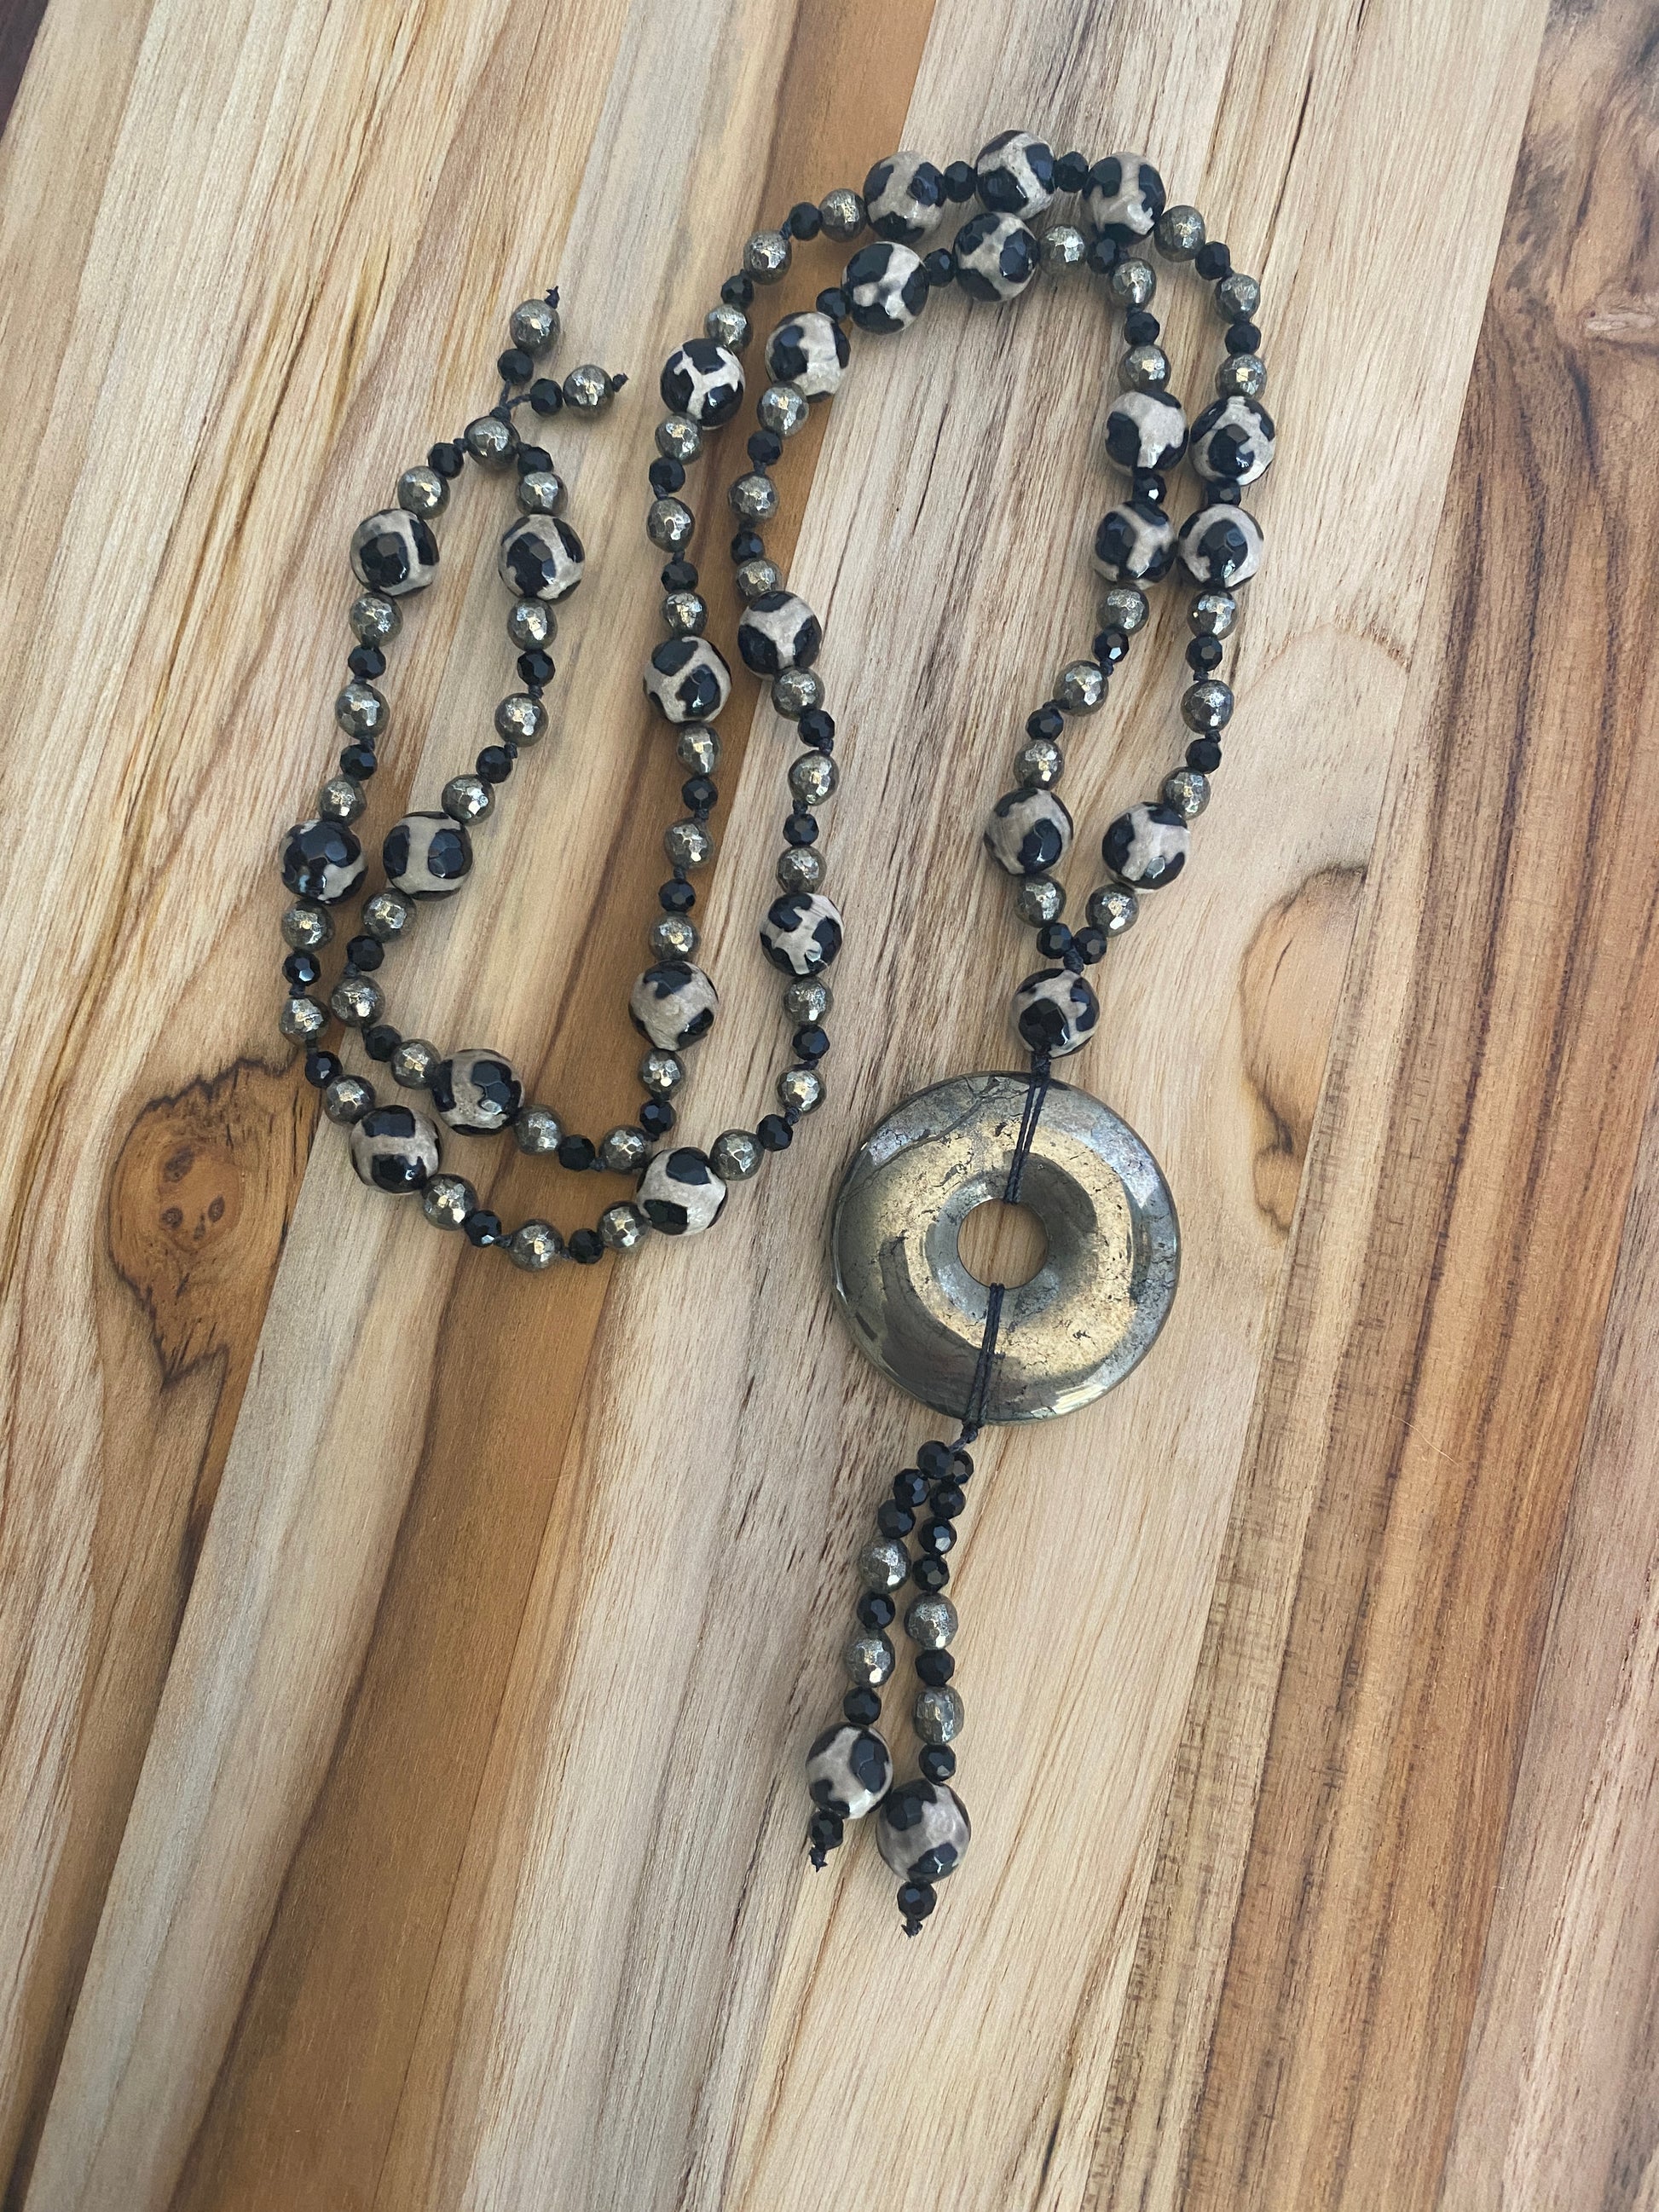 30" Pyrite Donut Dangle Necklace with Agate, Pyrite & Crystals - My Urban Gems